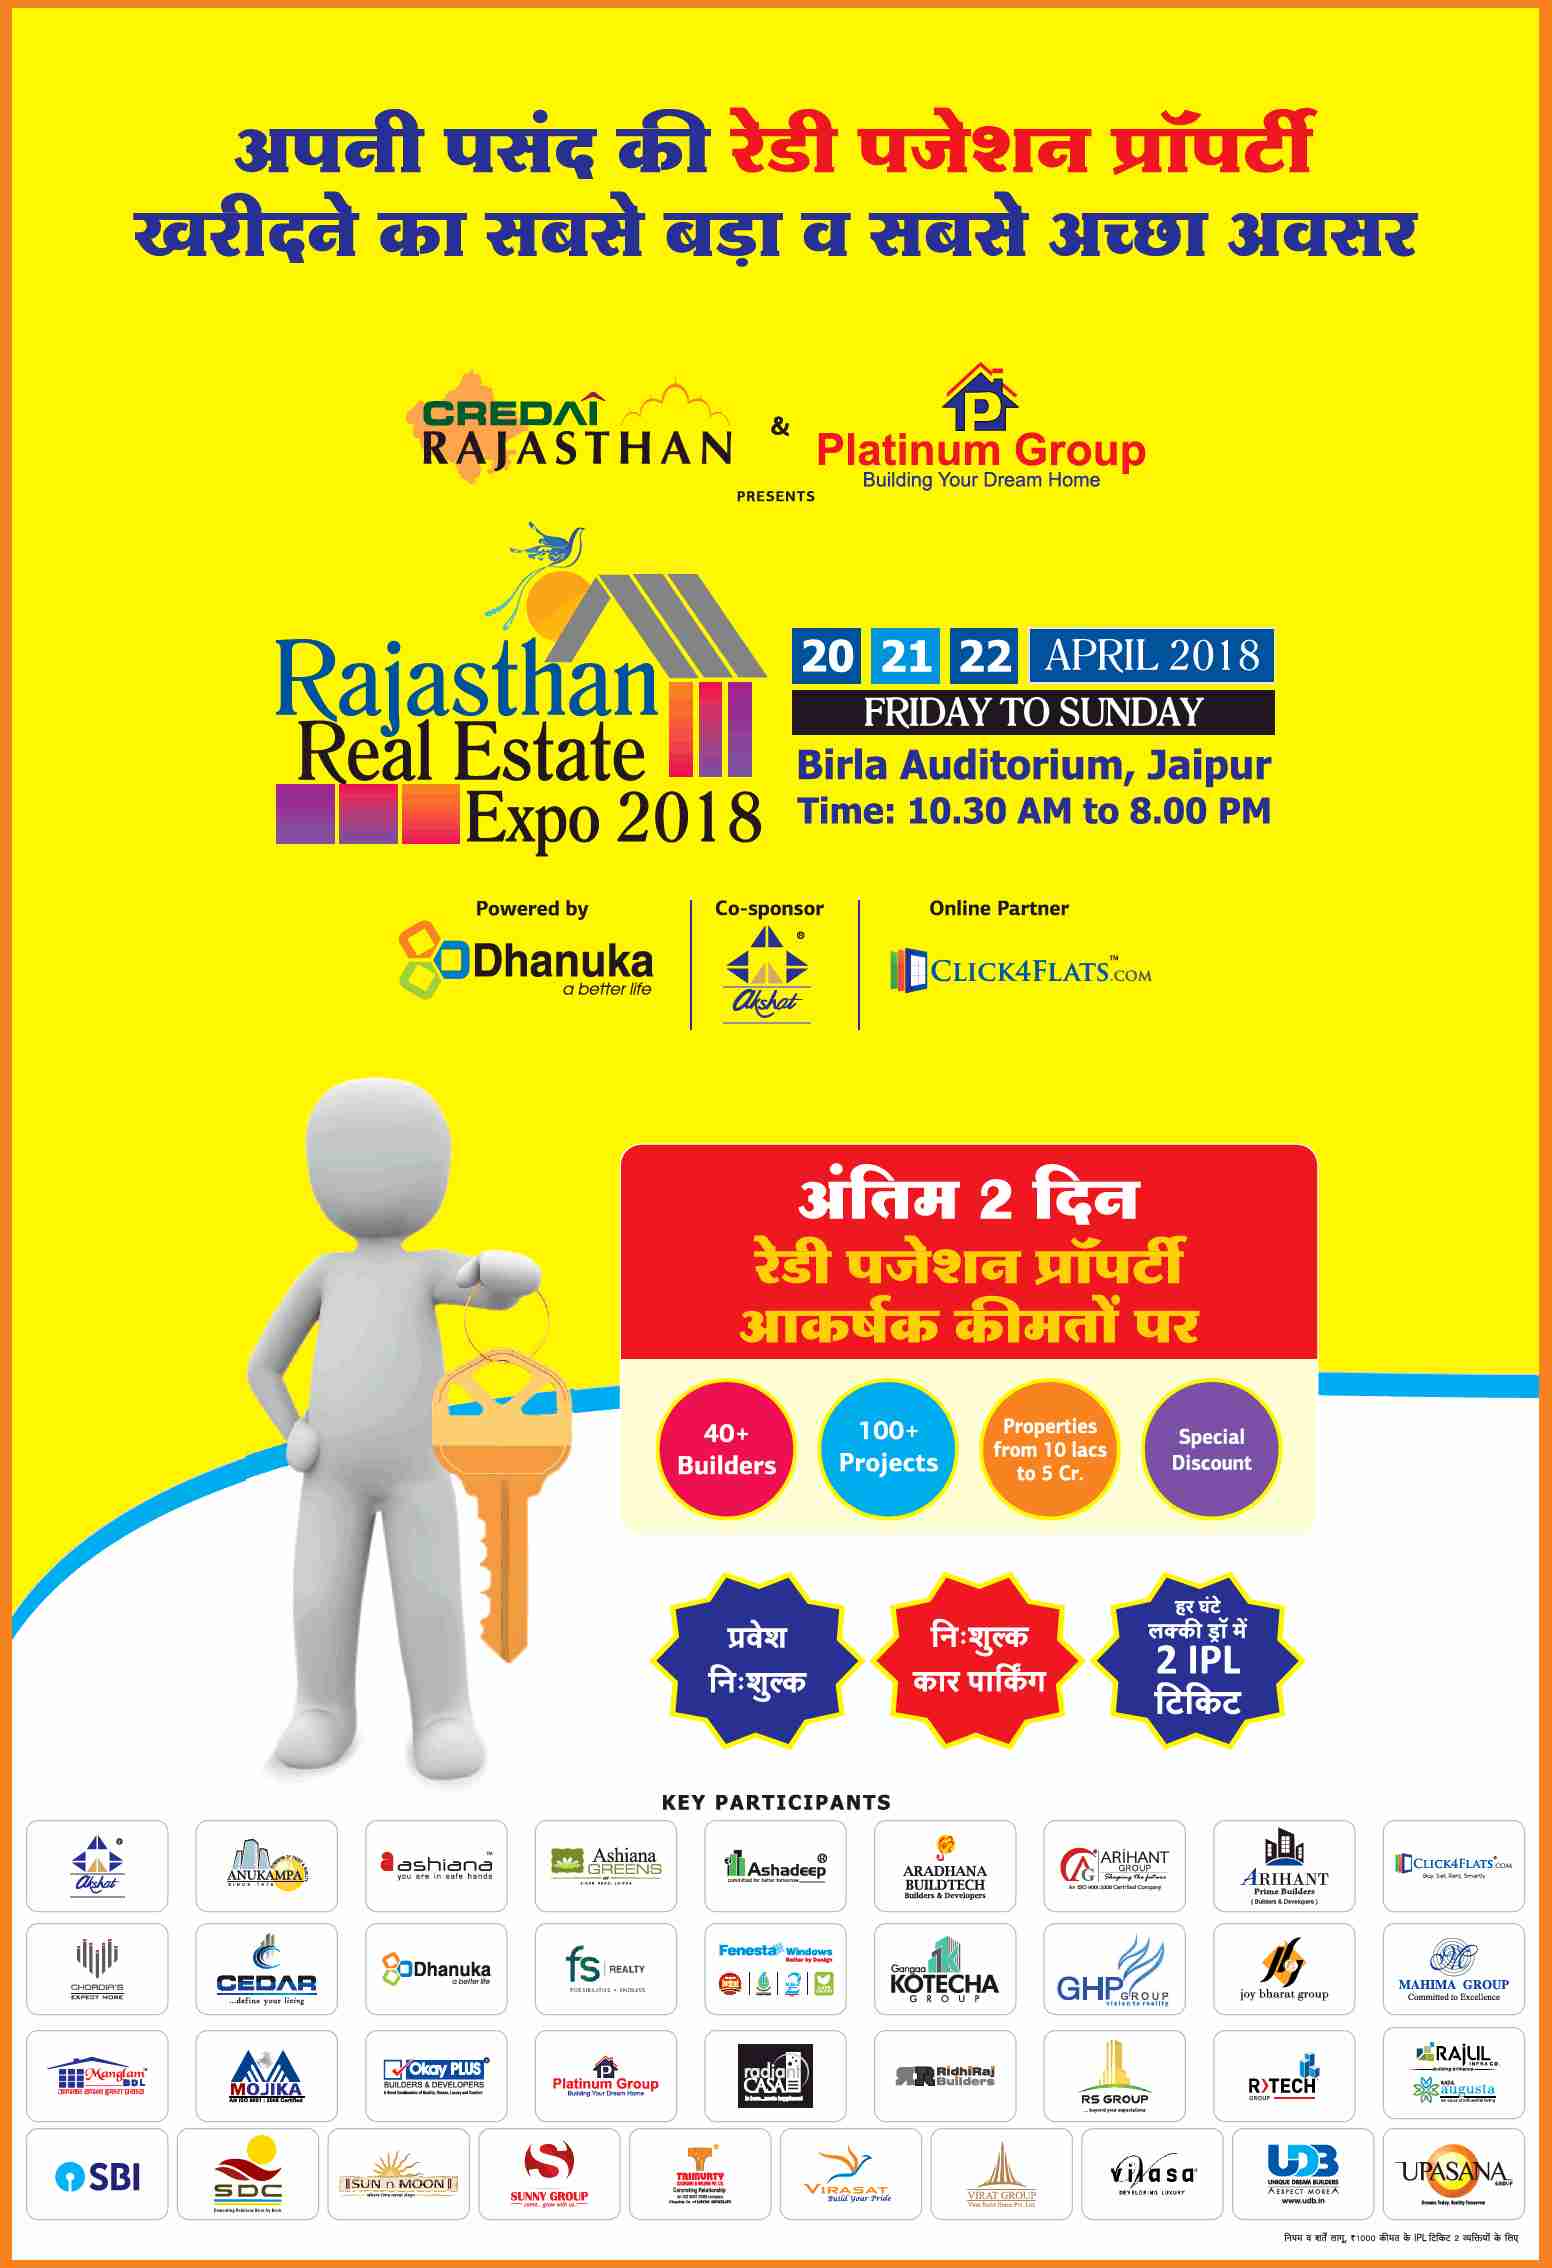 Rajasthan Real Estate Expo 2018